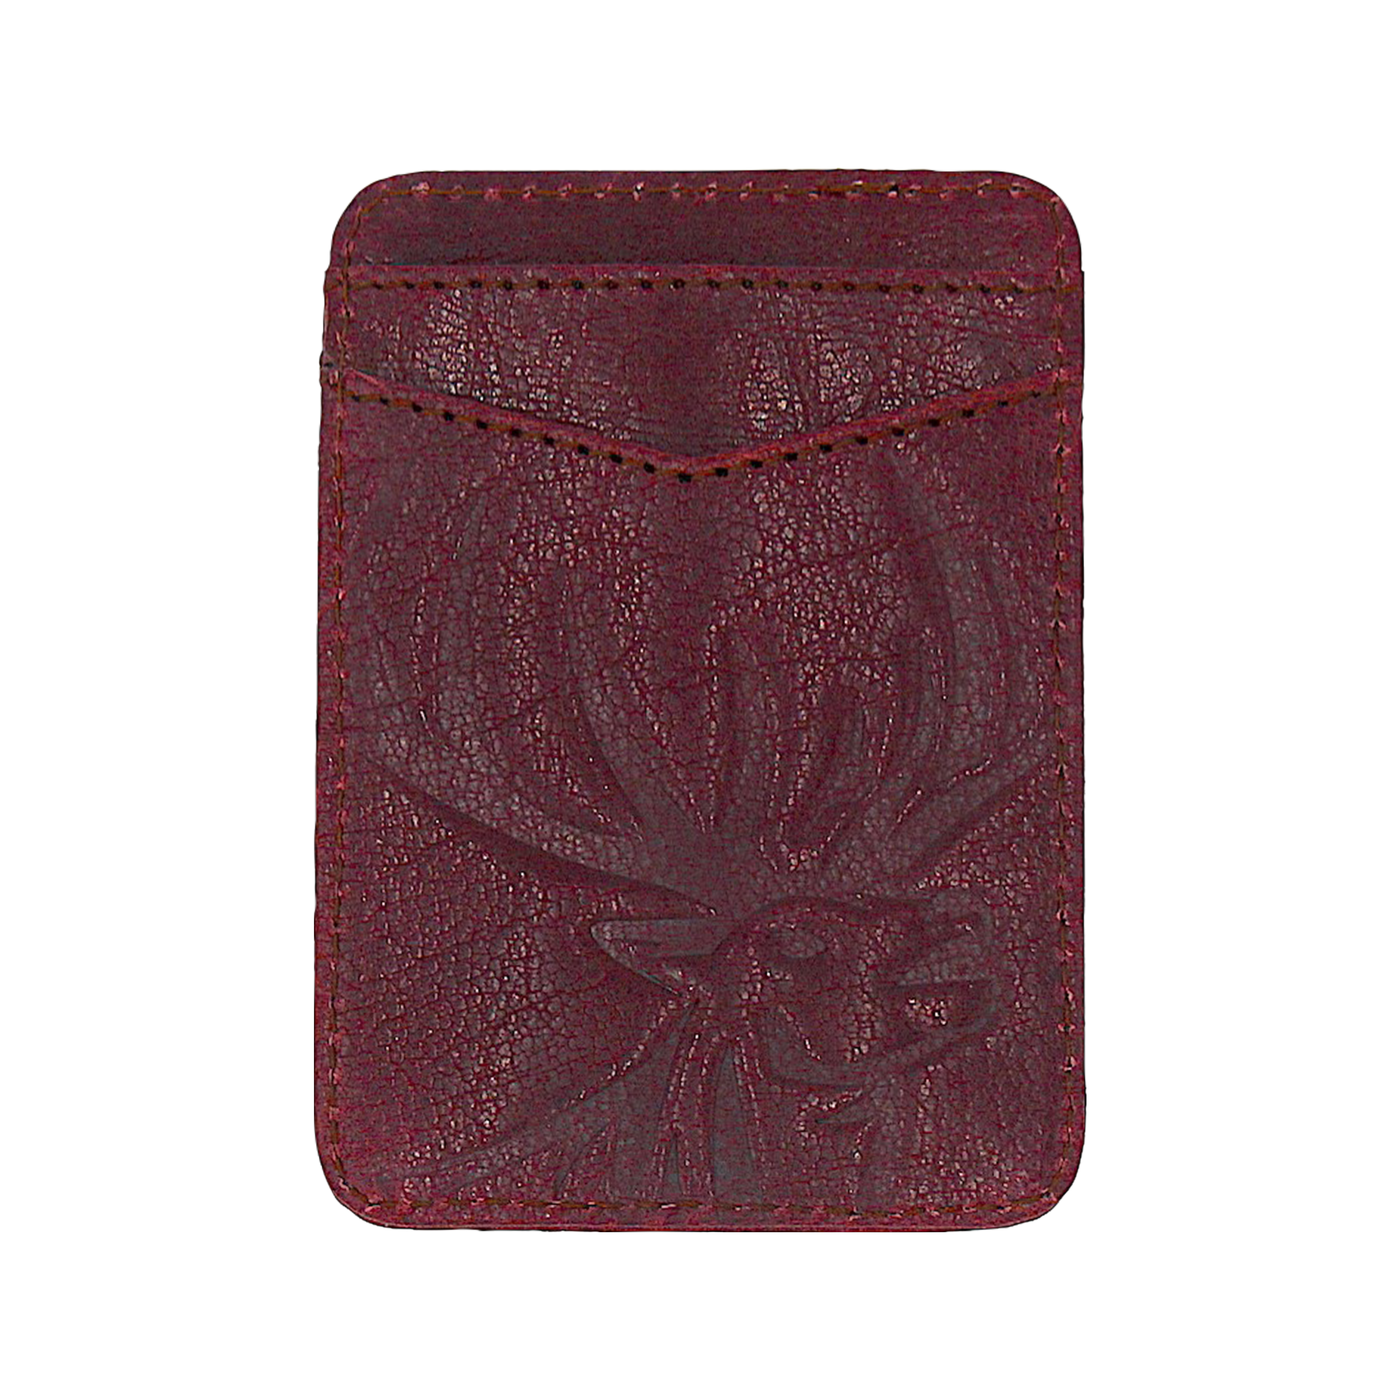 Providing a minimalist style, the Pursuit Front Pocket Elk Money Clip comes in premier full grain leather along with a beautiful bold hand-dyed color, topped with an elk debossed logo. A beautiful piece to have for the basics! Don't miss out! 2 Card Slots Strong Magnetic Closure Ultra Slim Minimalist & Modern Design Magnetic Clip Holds 10+ Bills Dimensions: 4"L x 2.8"H RFID Protection Color: Crimson